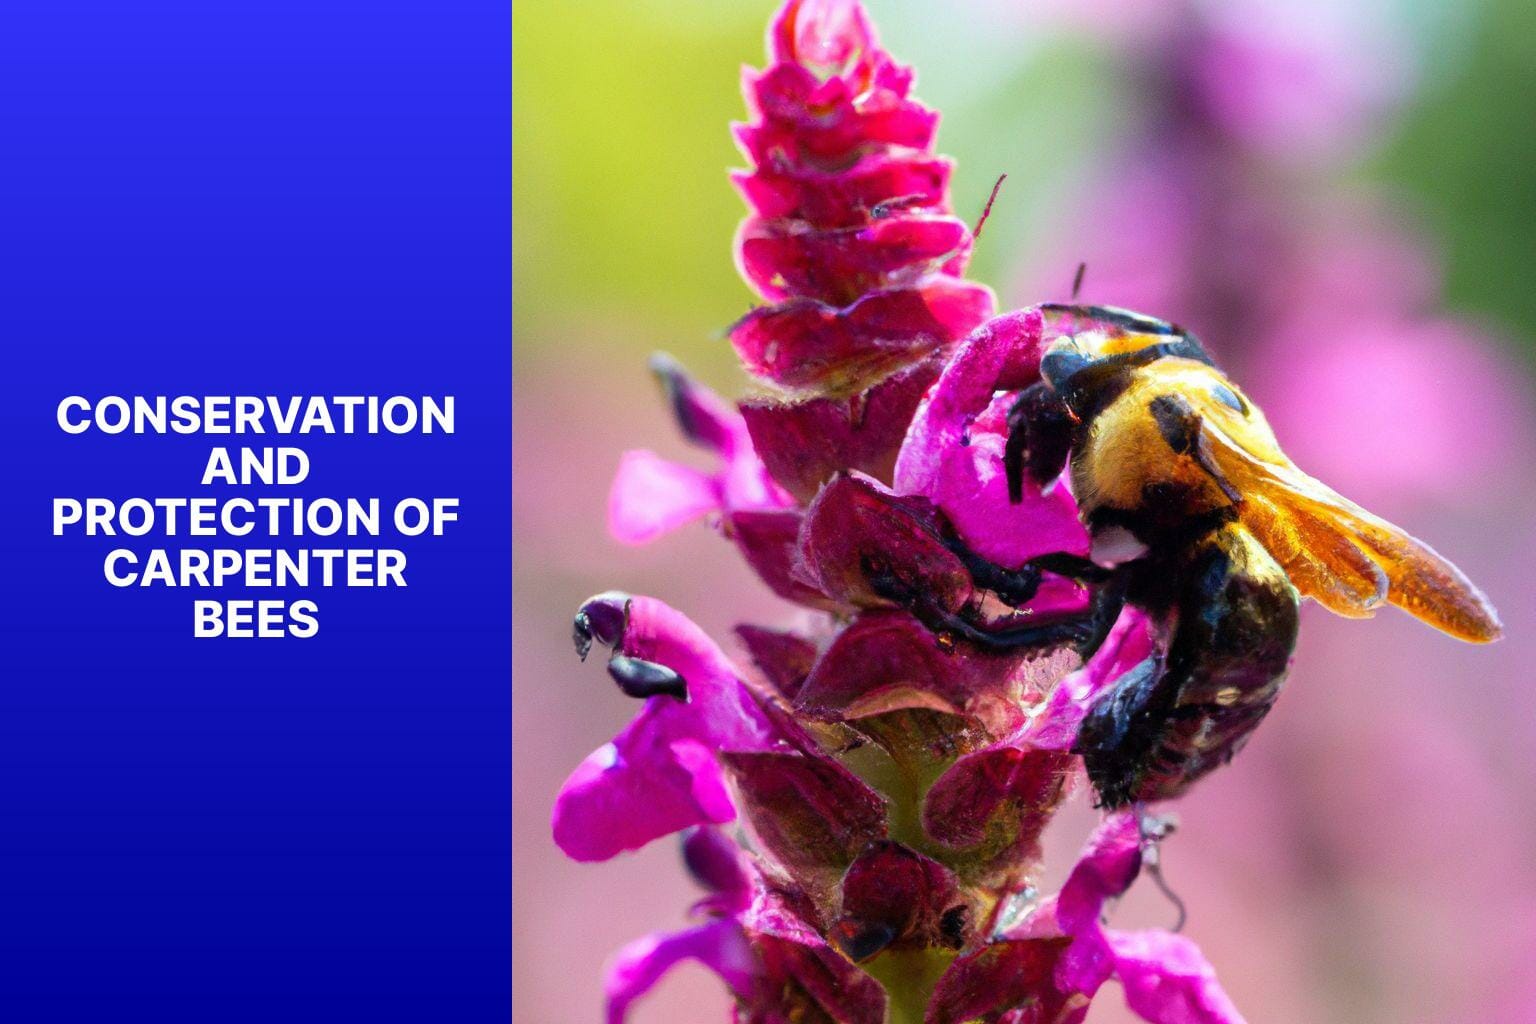 Conservation and Protection of Carpenter Bees - do carpenter bees pollinate 